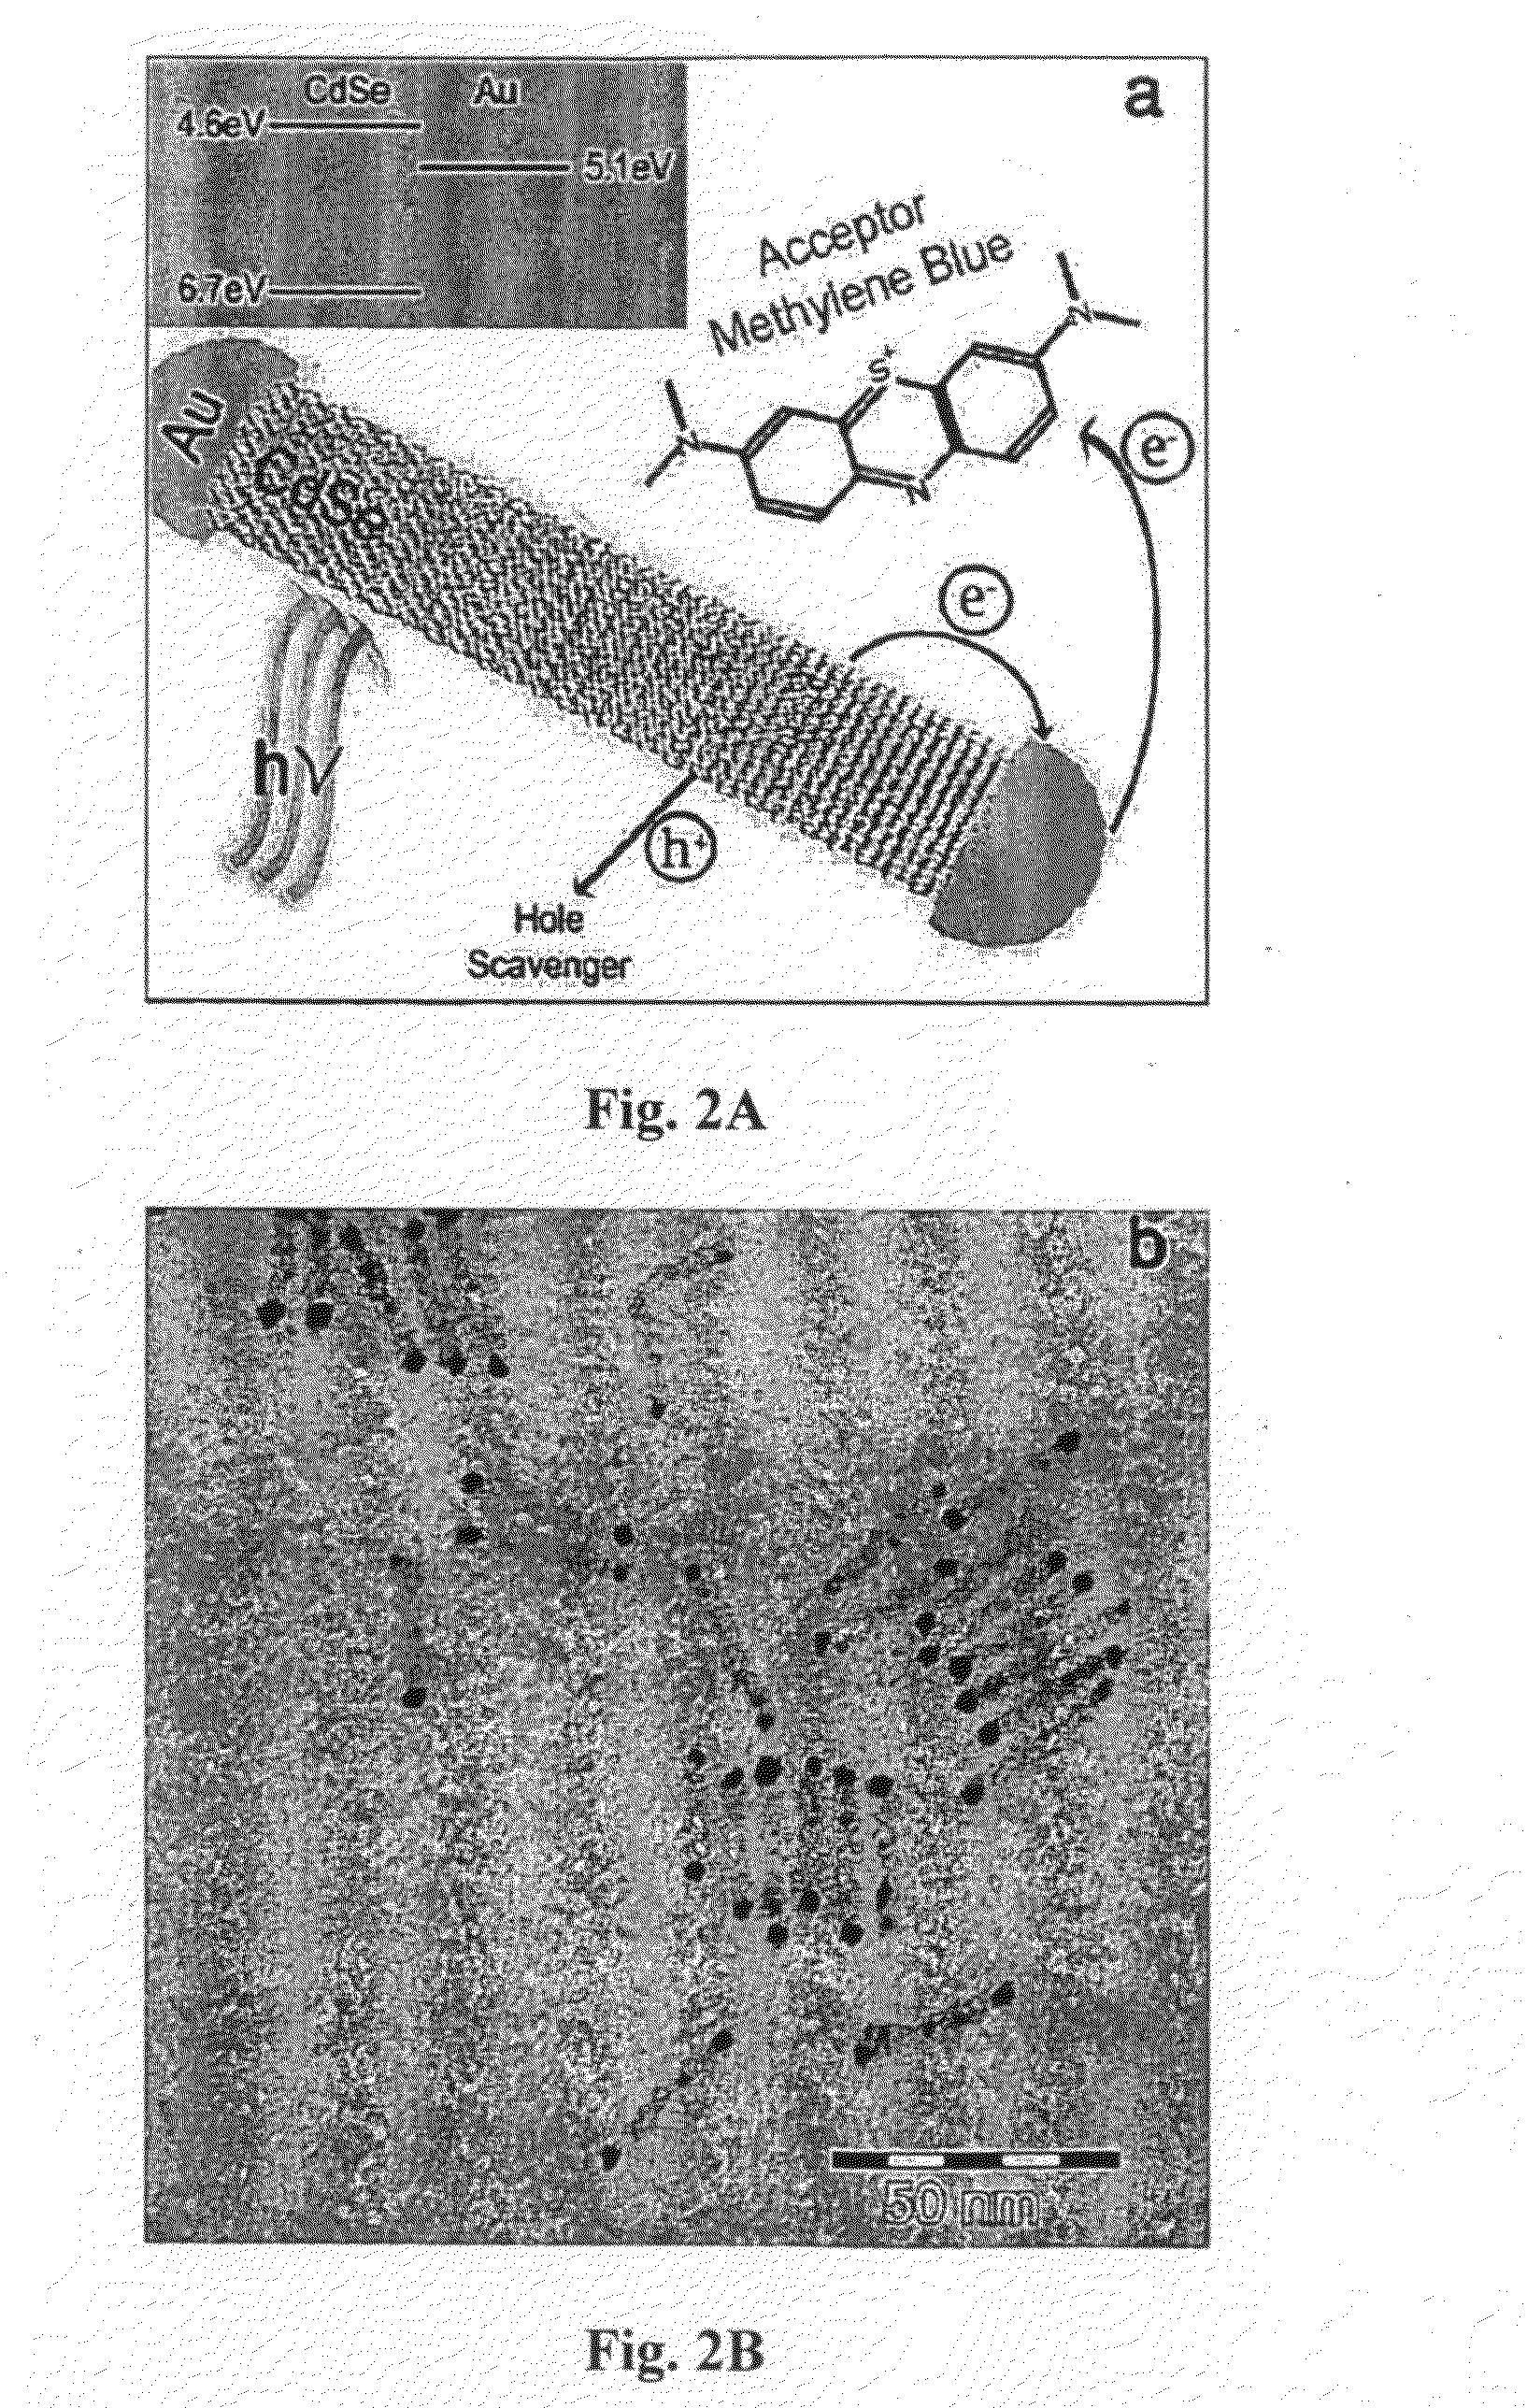 Hybrid metal-semiconductor nanoparticles and methods for photo-inducing charge separation and applications thereof